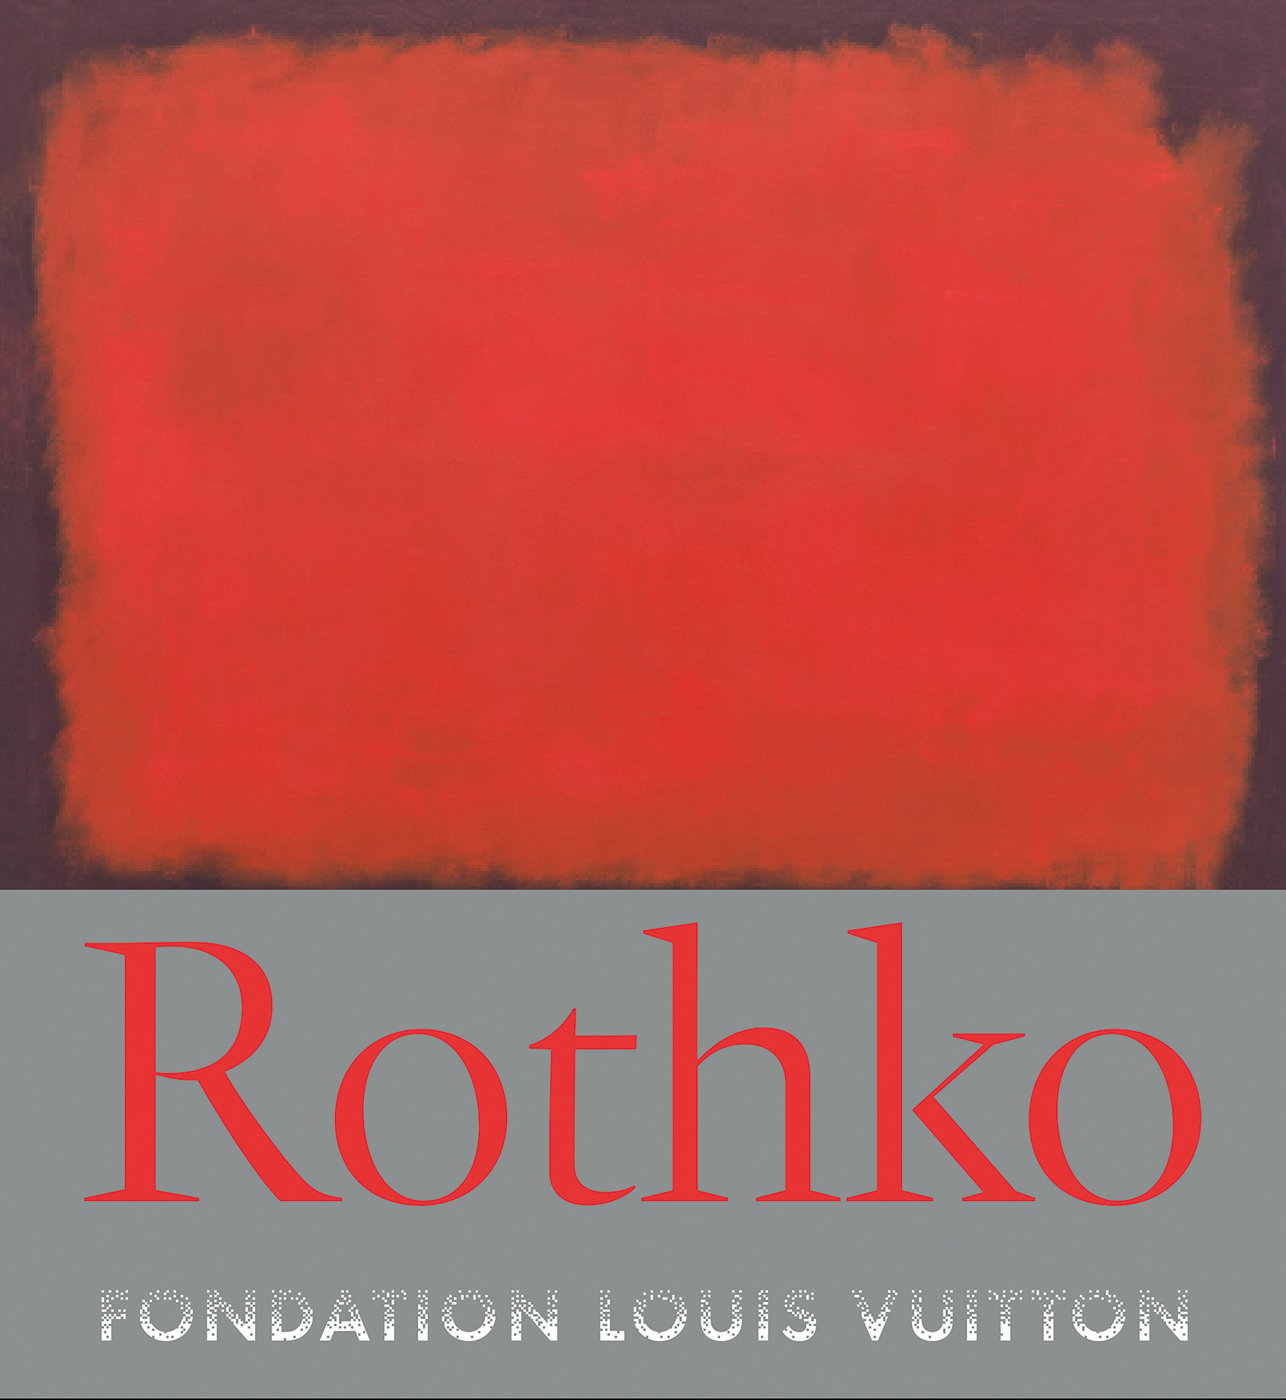 Rothko - Every Picture Tells a Story